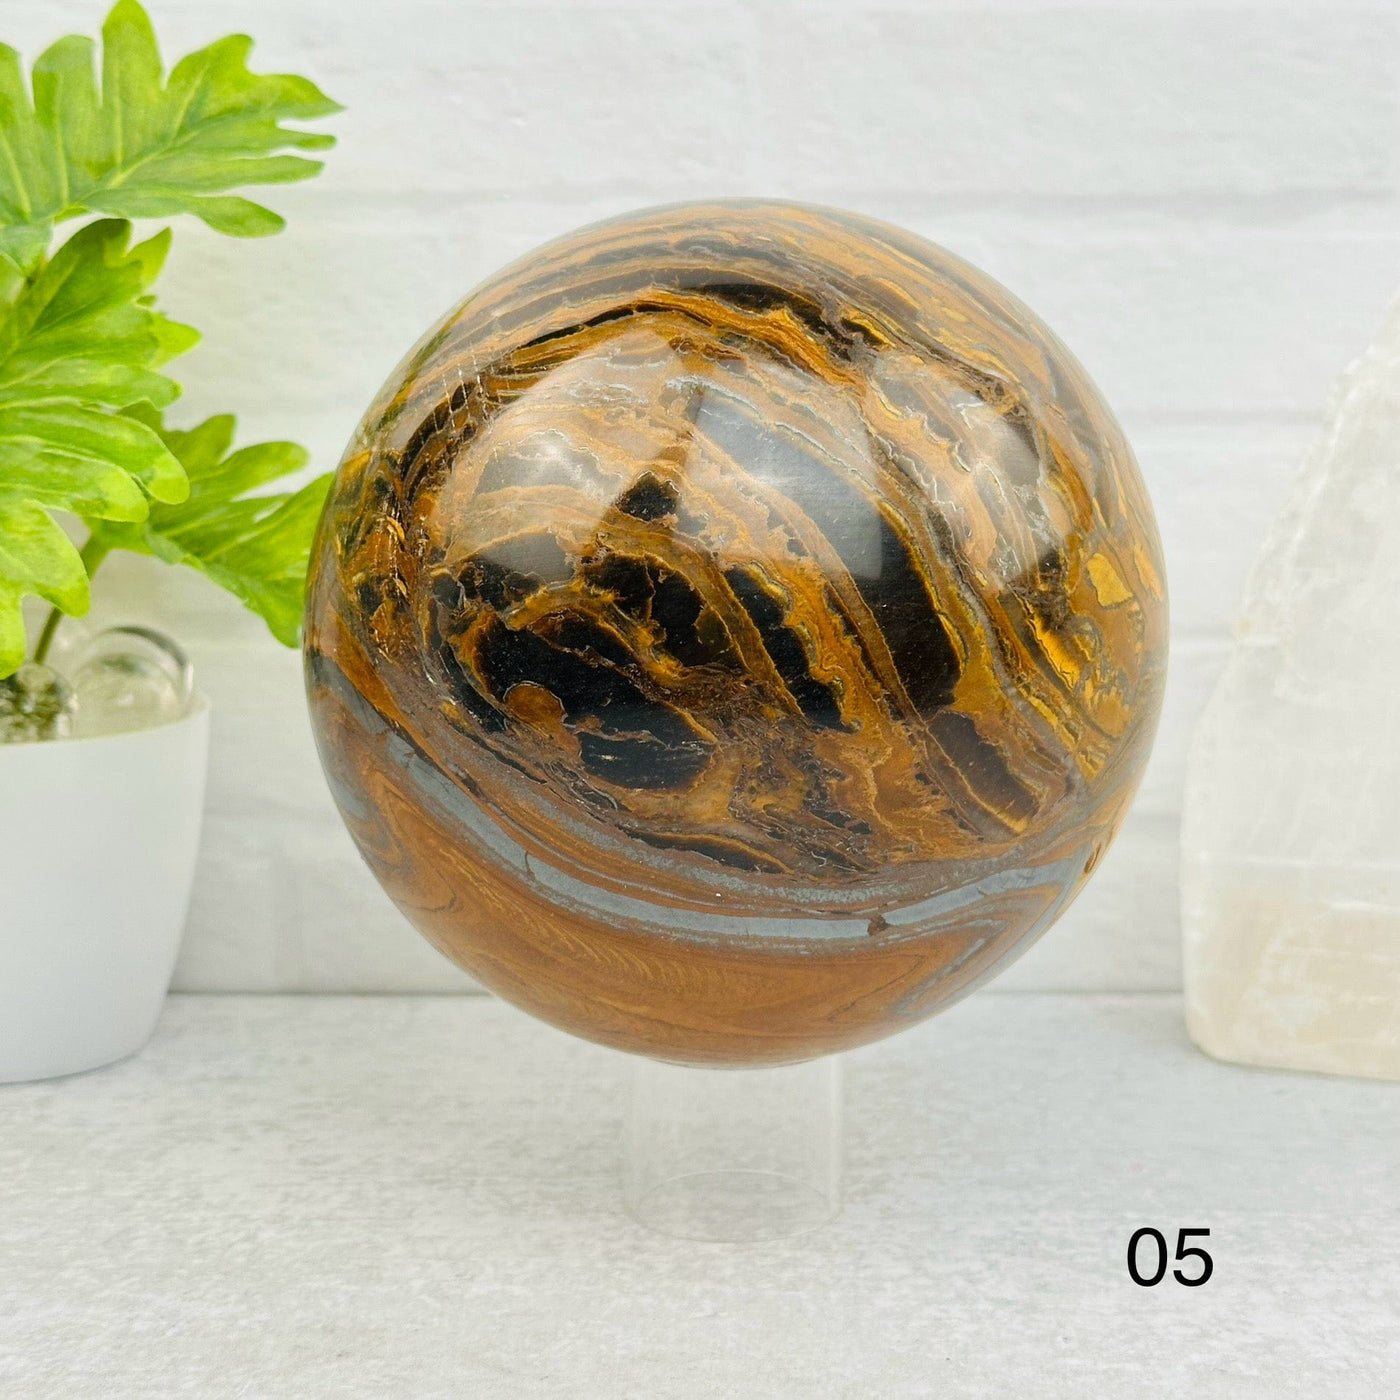 Tigers Eye with Hematite Polished Spheres - You Choose - option 05 displayed s home decor